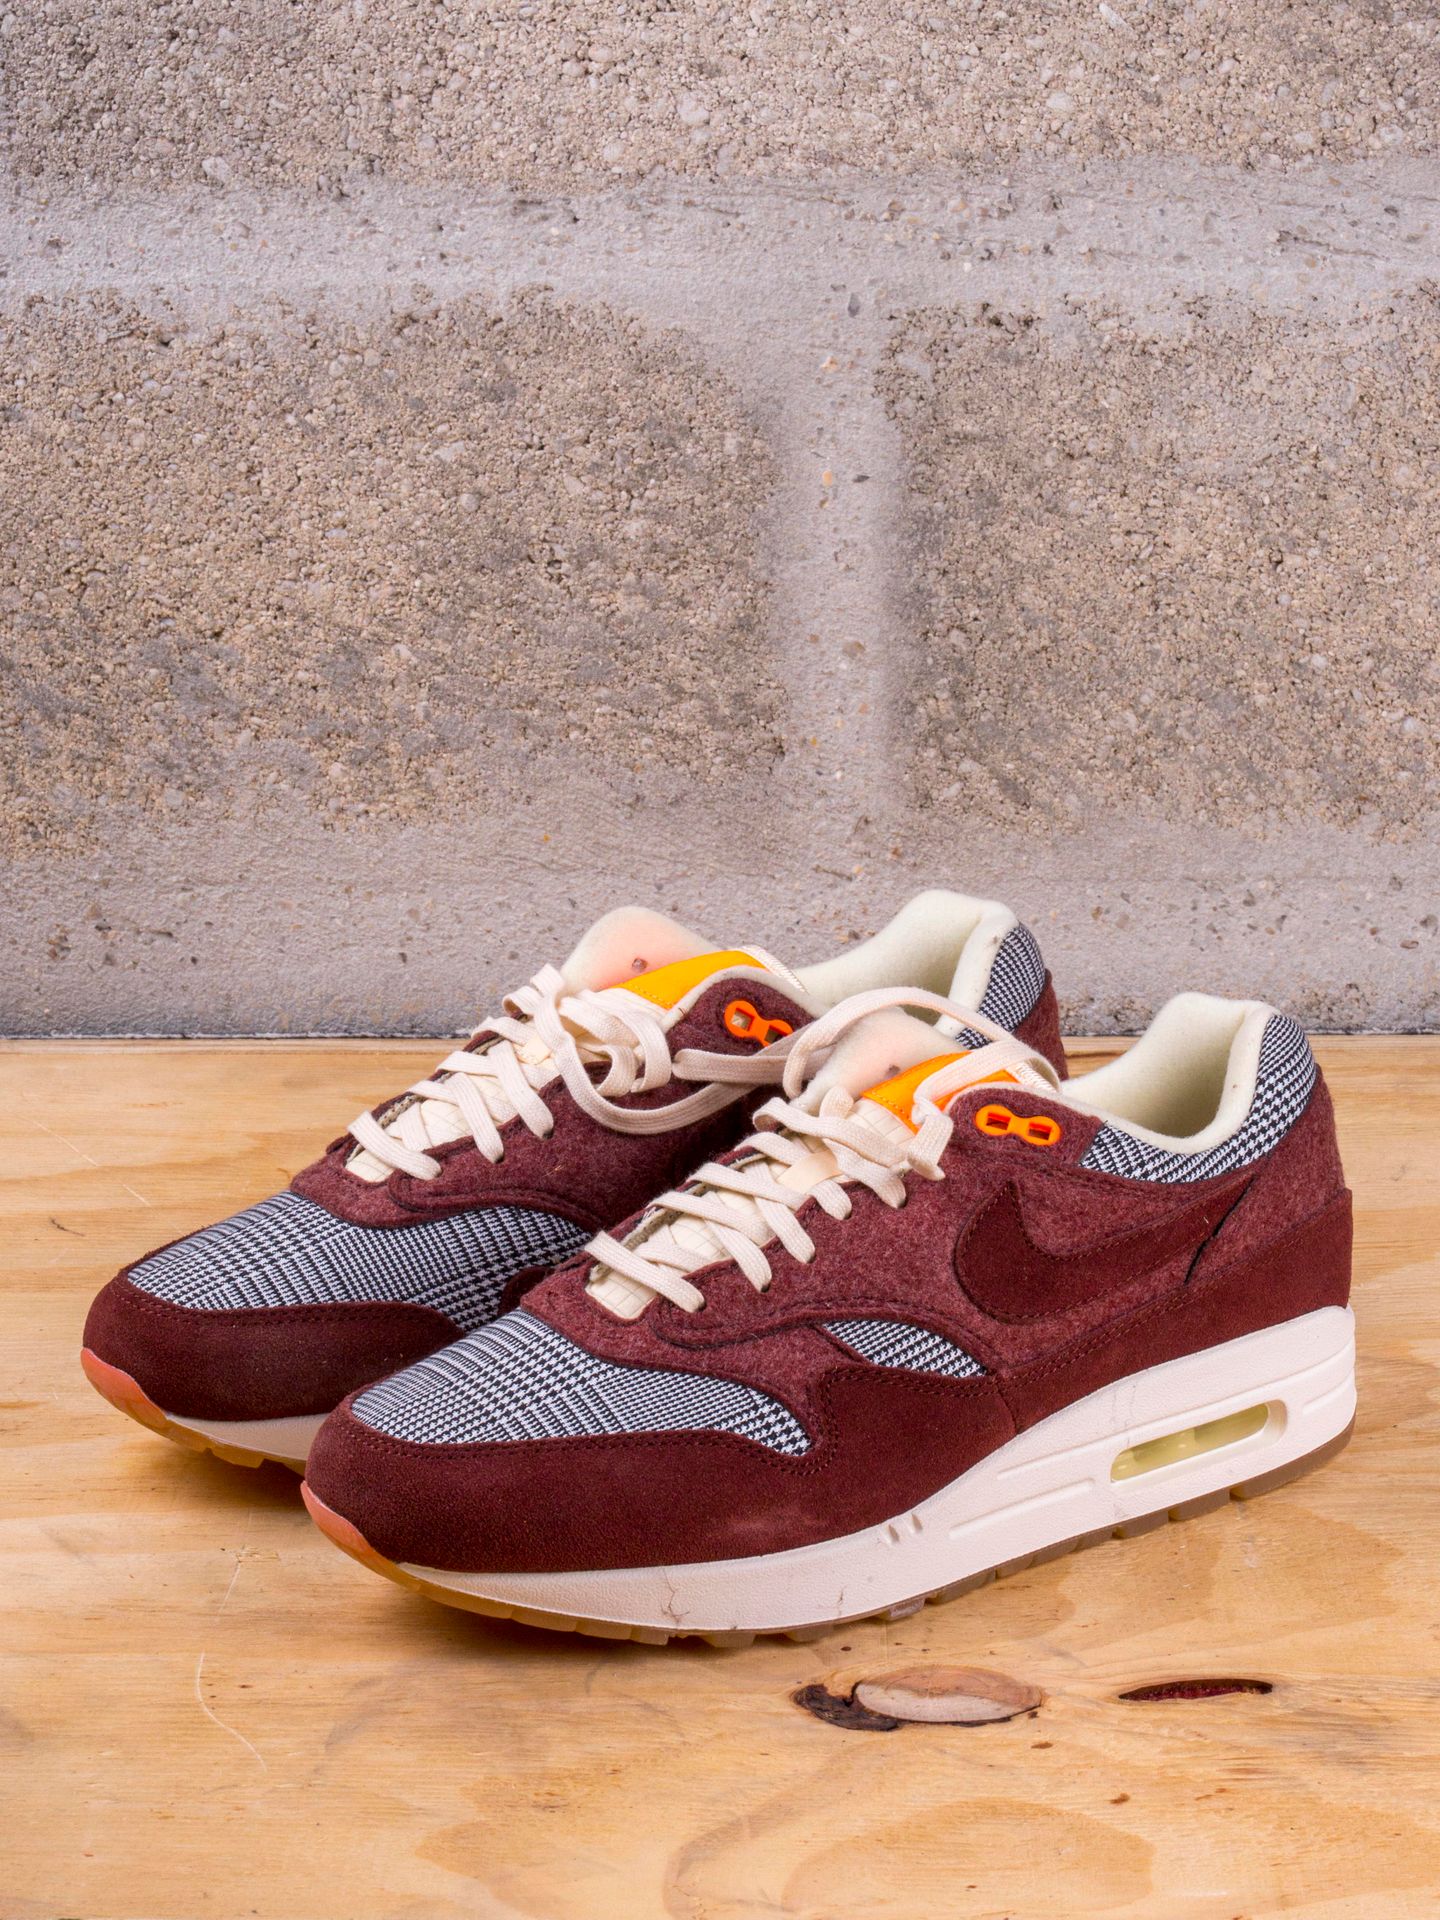 Null NIKE AIR MAX 1

Houndstooth Bronze Eclipse

(CT1207-200)

US 7,5 / EU 40,5
&hellip;